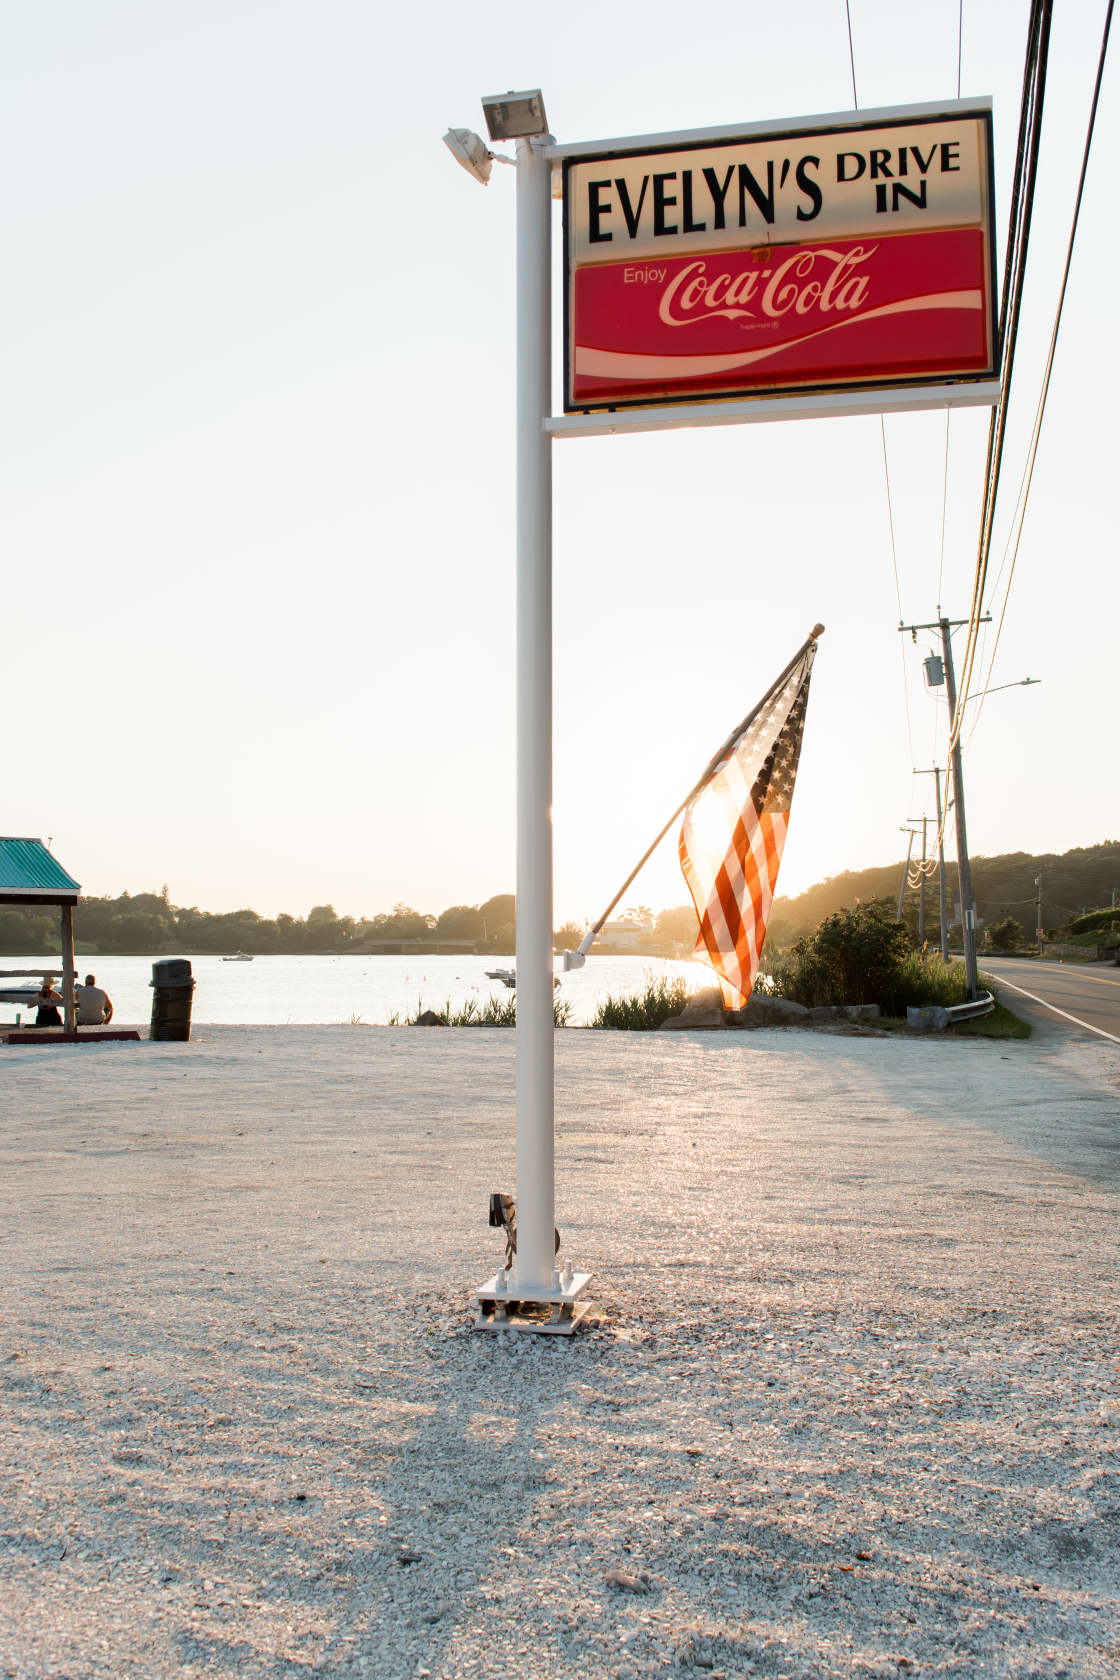 Evelyn's Historic Drive-inn Waterfront Restaurant- 5 minute Drive away